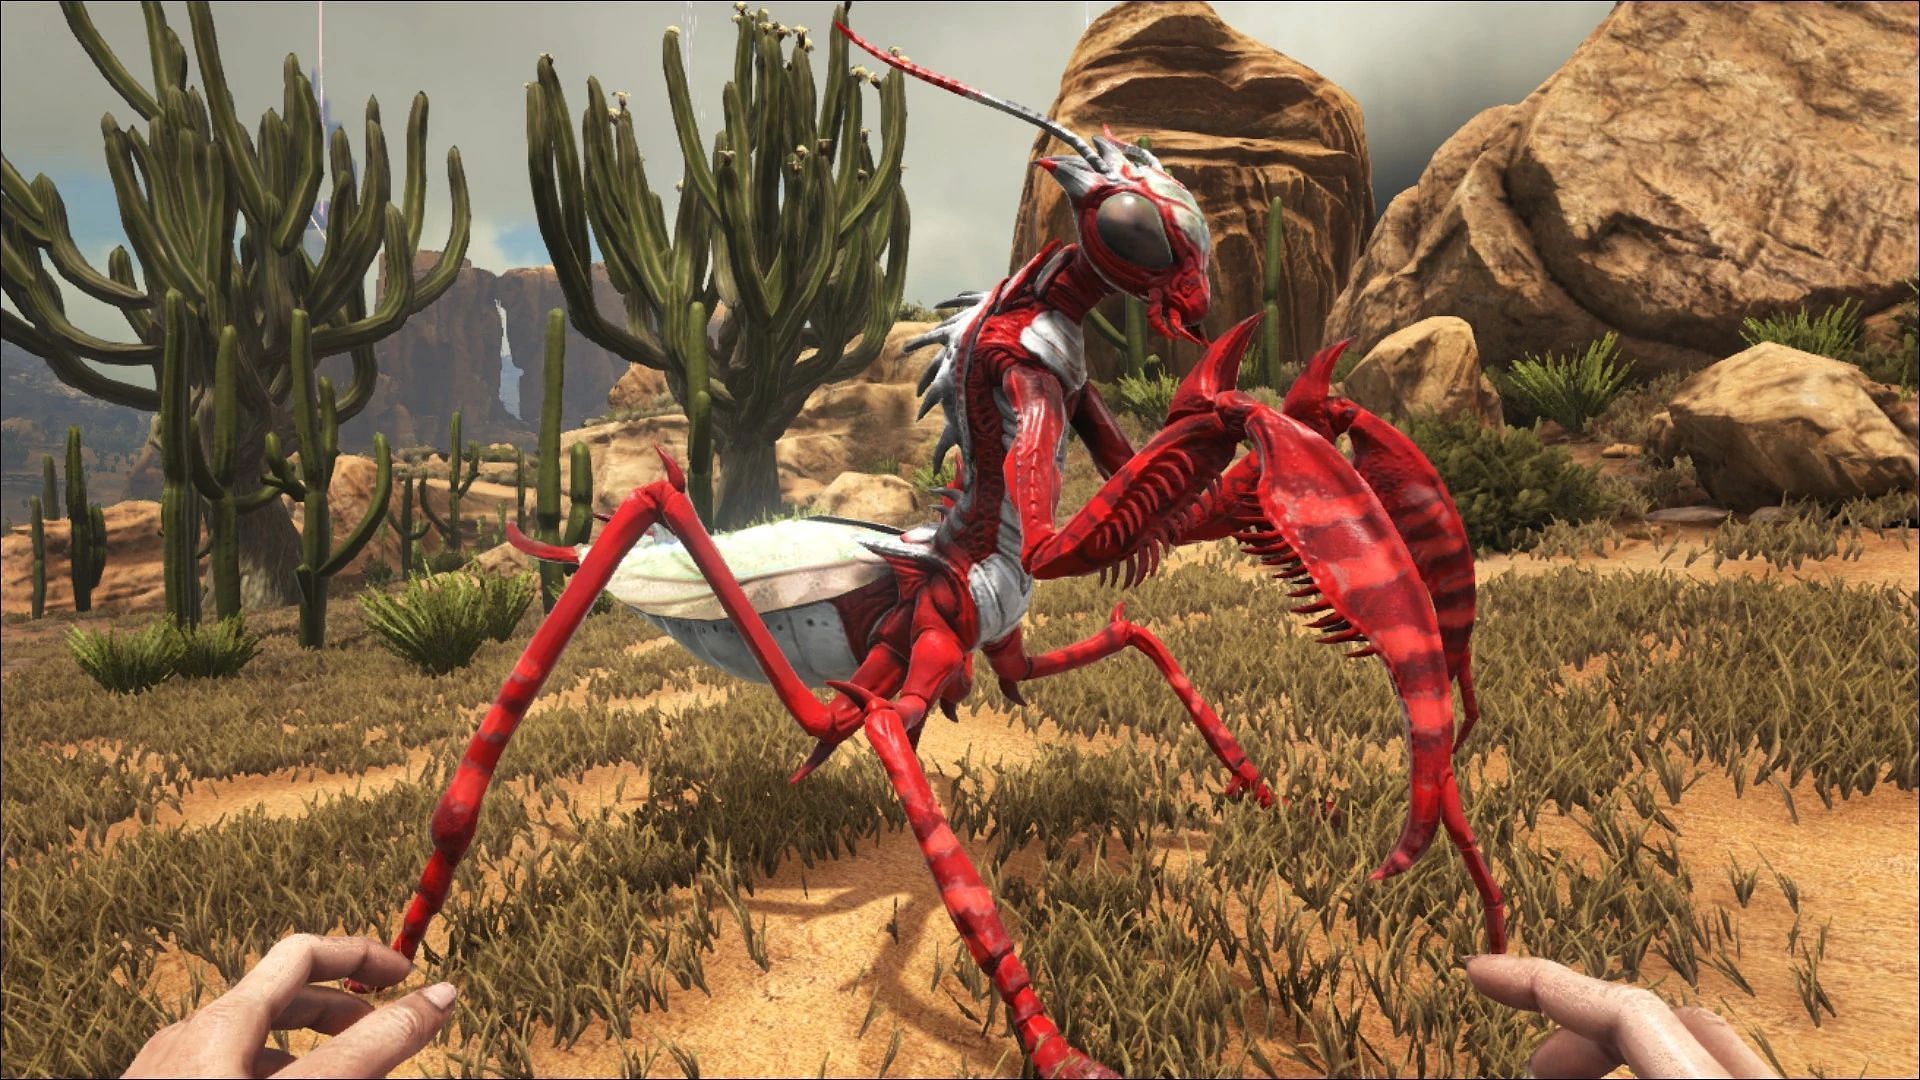 Players can use Mantis for Organic Polymer in Ark Survival Ascnded (Image via Studio Wildcard)